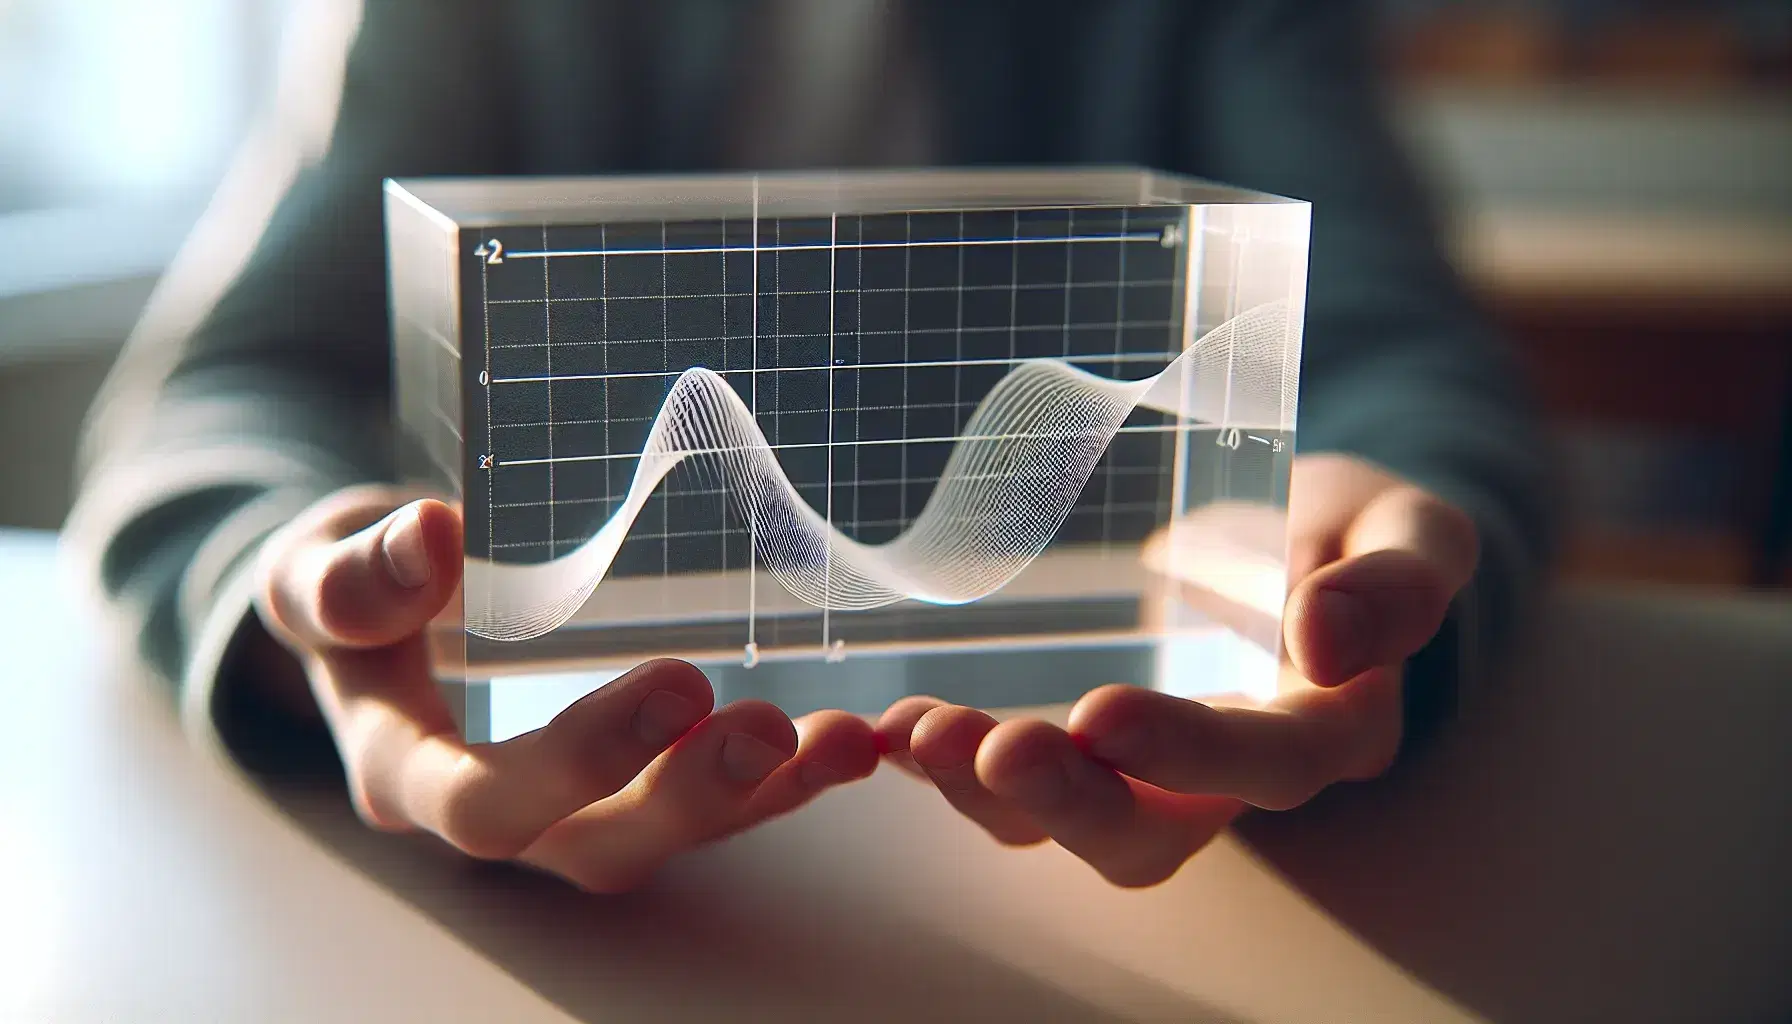 Hands holding a 3D graph etched in a clear acrylic block, with a smooth curve from lower left to upper right, in a softly lit classroom setting.